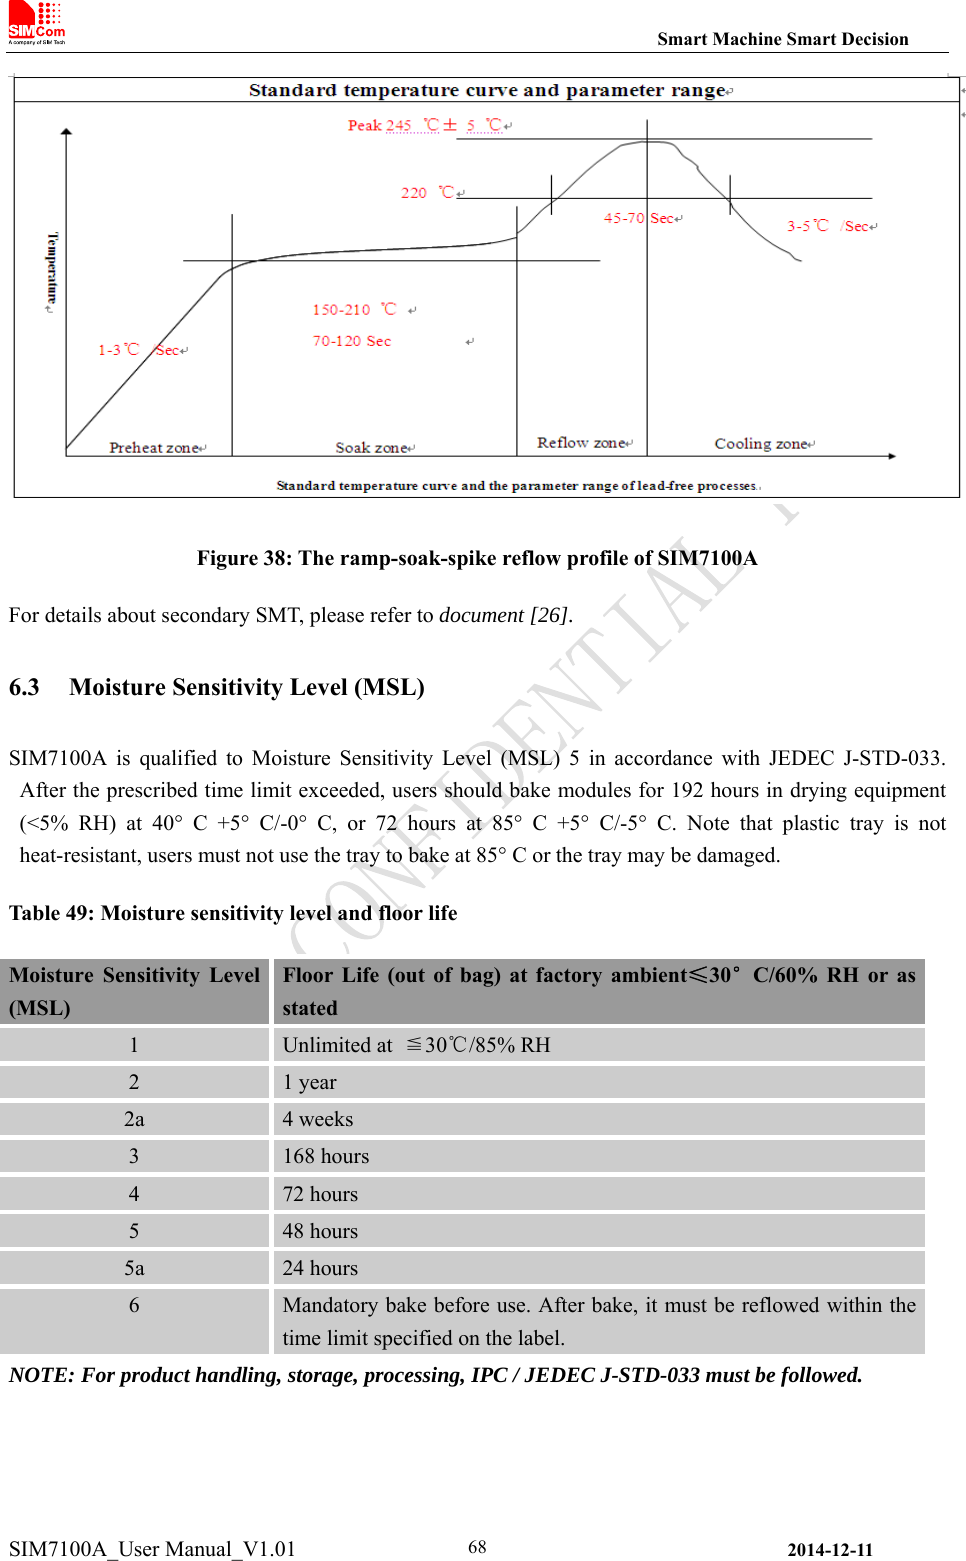                                                                Smart Machine Smart Decision SIM7100A_User Manual_V1.01                2014-12-11 68 Figure 38: The ramp-soak-spike reflow profile of SIM7100A For details about secondary SMT, please refer to document [26]. 6.3 Moisture Sensitivity Level (MSL) SIM7100A  is  qualified  to  Moisture  Sensitivity  Level  (MSL)  5  in  accordance  with  JEDEC  J-STD-033. After the prescribed time limit exceeded, users should bake modules for 192 hours in drying equipment (&lt;5%  RH)  at  40°  C  +5°  C/-0°  C,  or  72  hours  at  85°  C  +5°  C/-5°  C.  Note  that  plastic  tray  is  not heat-resistant, users must not use the tray to bake at 85° C or the tray may be damaged. Table 49: Moisture sensitivity level and floor life Moisture  Sensitivity  Level (MSL) Floor  Life  (out  of  bag)  at  factory  ambient≤30°C/60%  RH  or  as stated 1  Unlimited at  ≦30℃/85% RH 2  1 year 2a  4 weeks 3  168 hours 4  72 hours 5  48 hours 5a  24 hours 6  Mandatory bake before use. After bake, it must be reflowed within the time limit specified on the label. NOTE: For product handling, storage, processing, IPC / JEDEC J-STD-033 must be followed.  